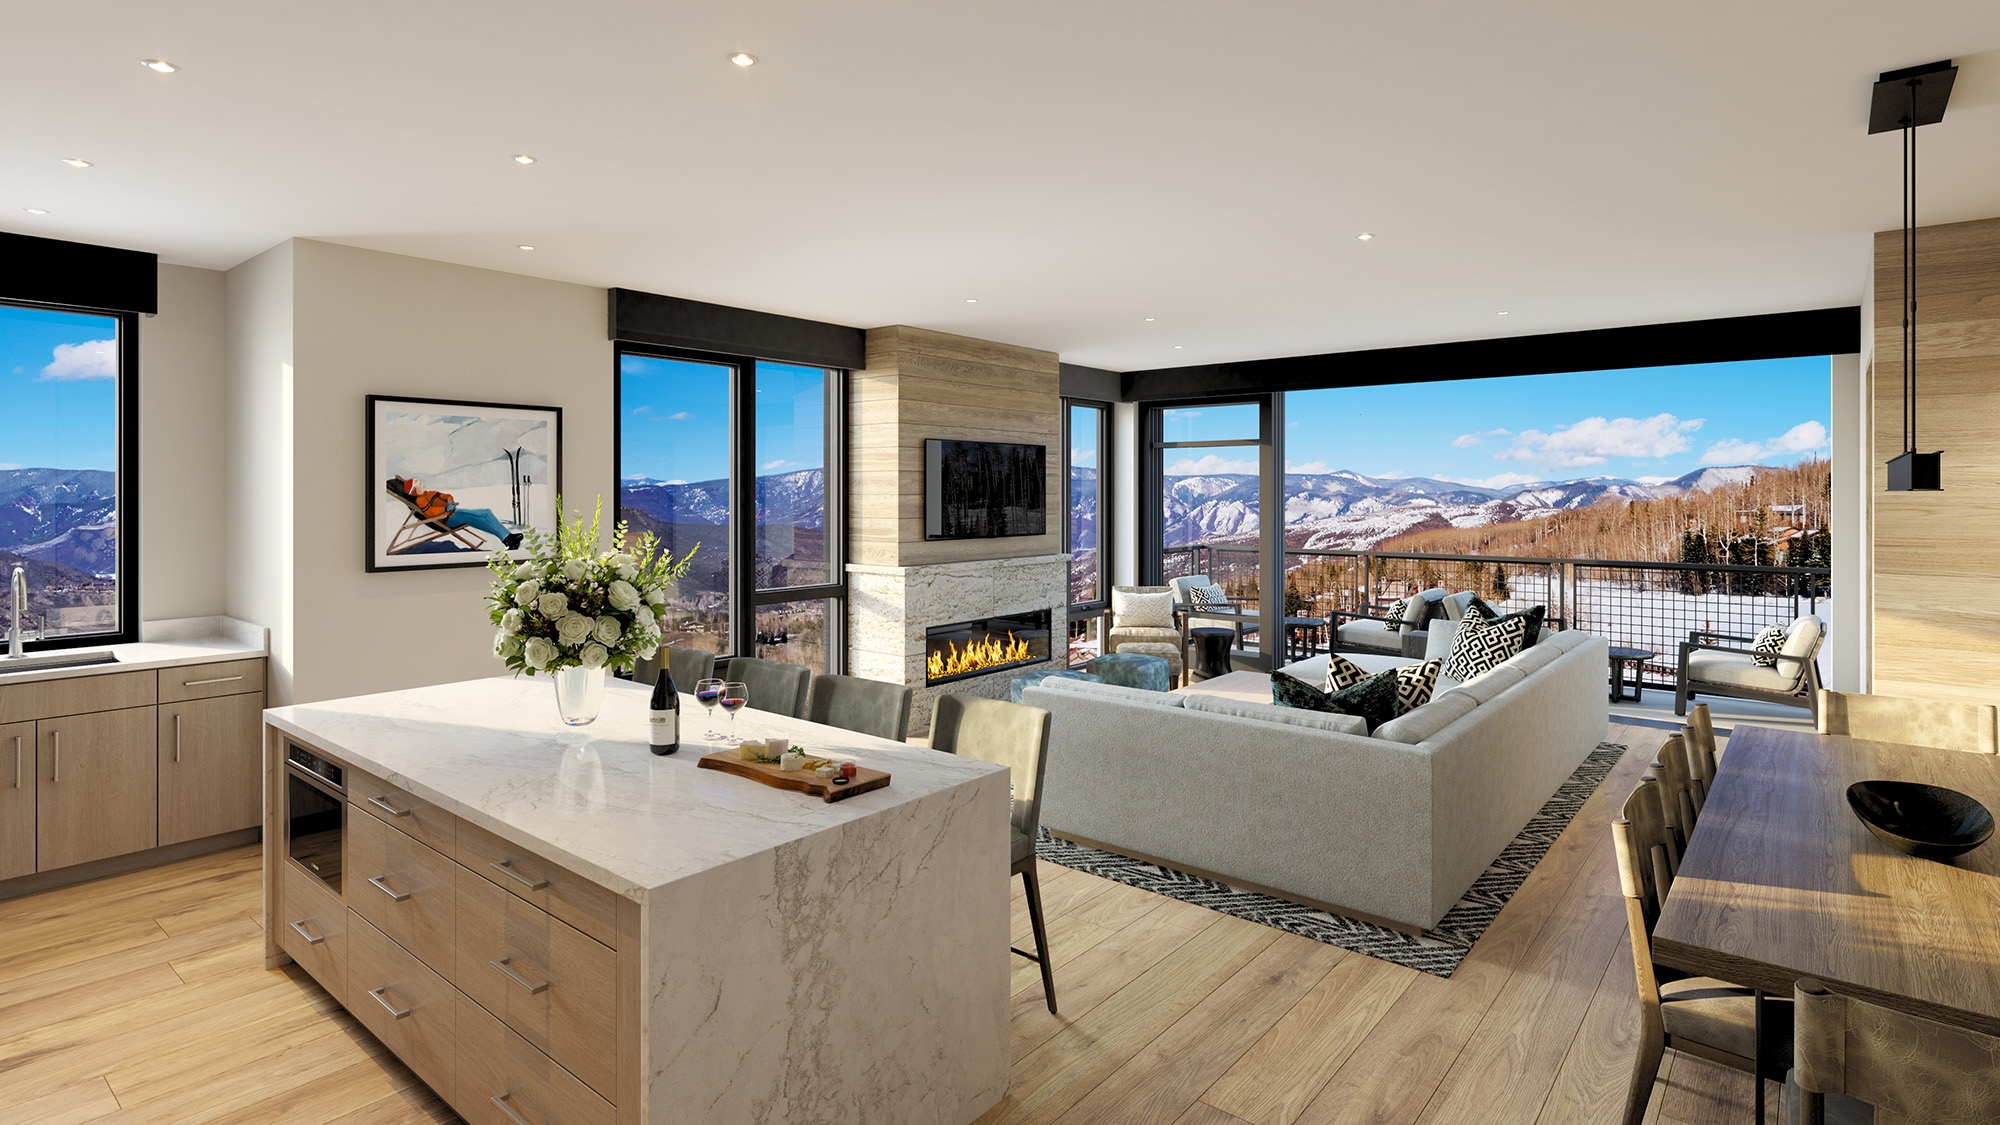 Kitchen and Living Room Interior Rendering Cirque Residences at Viceroy Snowmass;